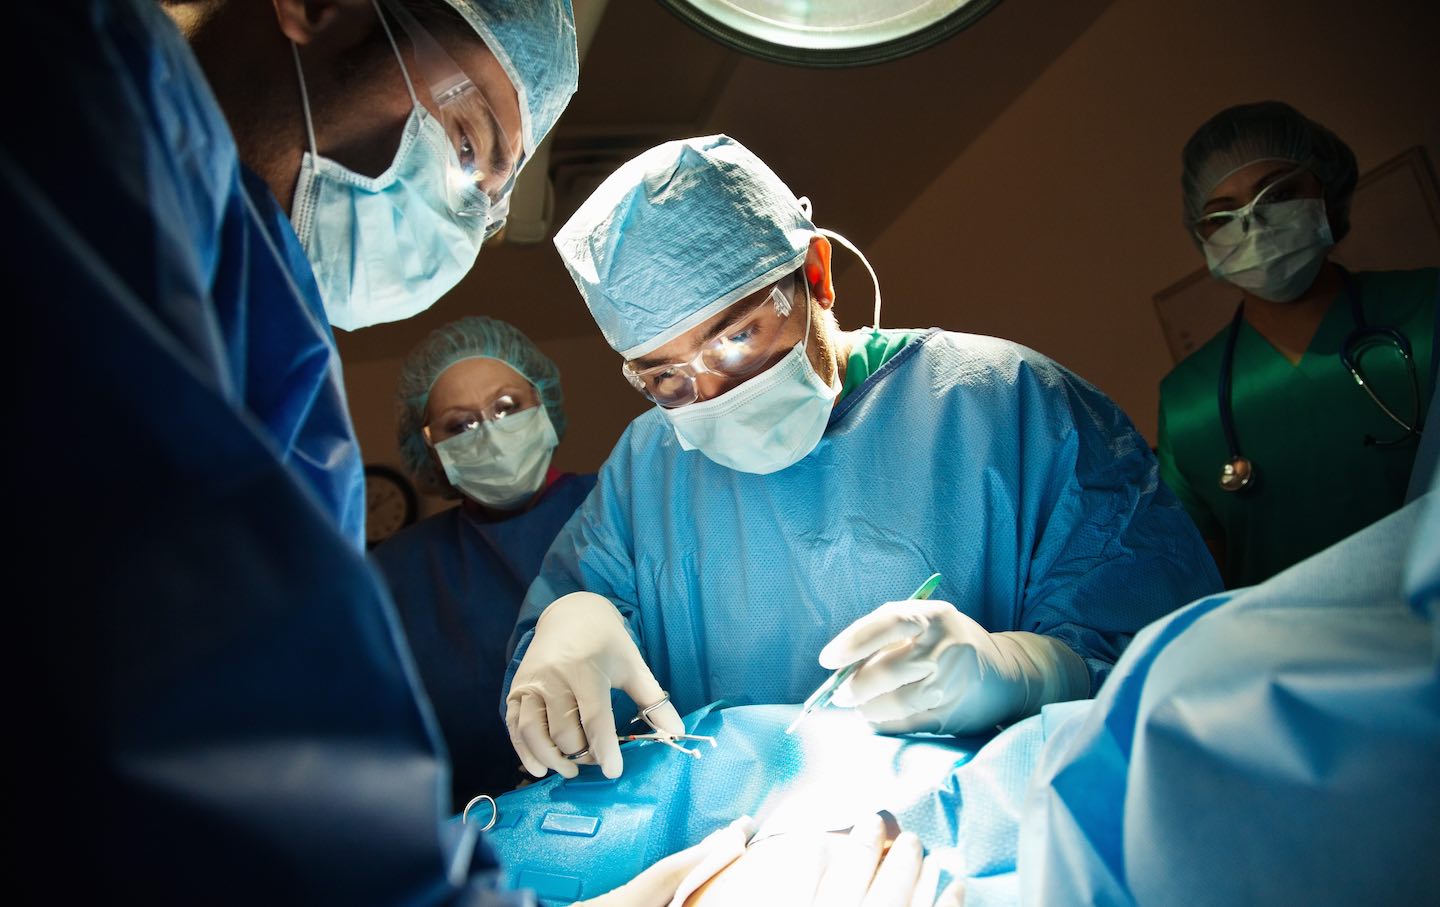 A surgeon performs a C-Section in the operating room